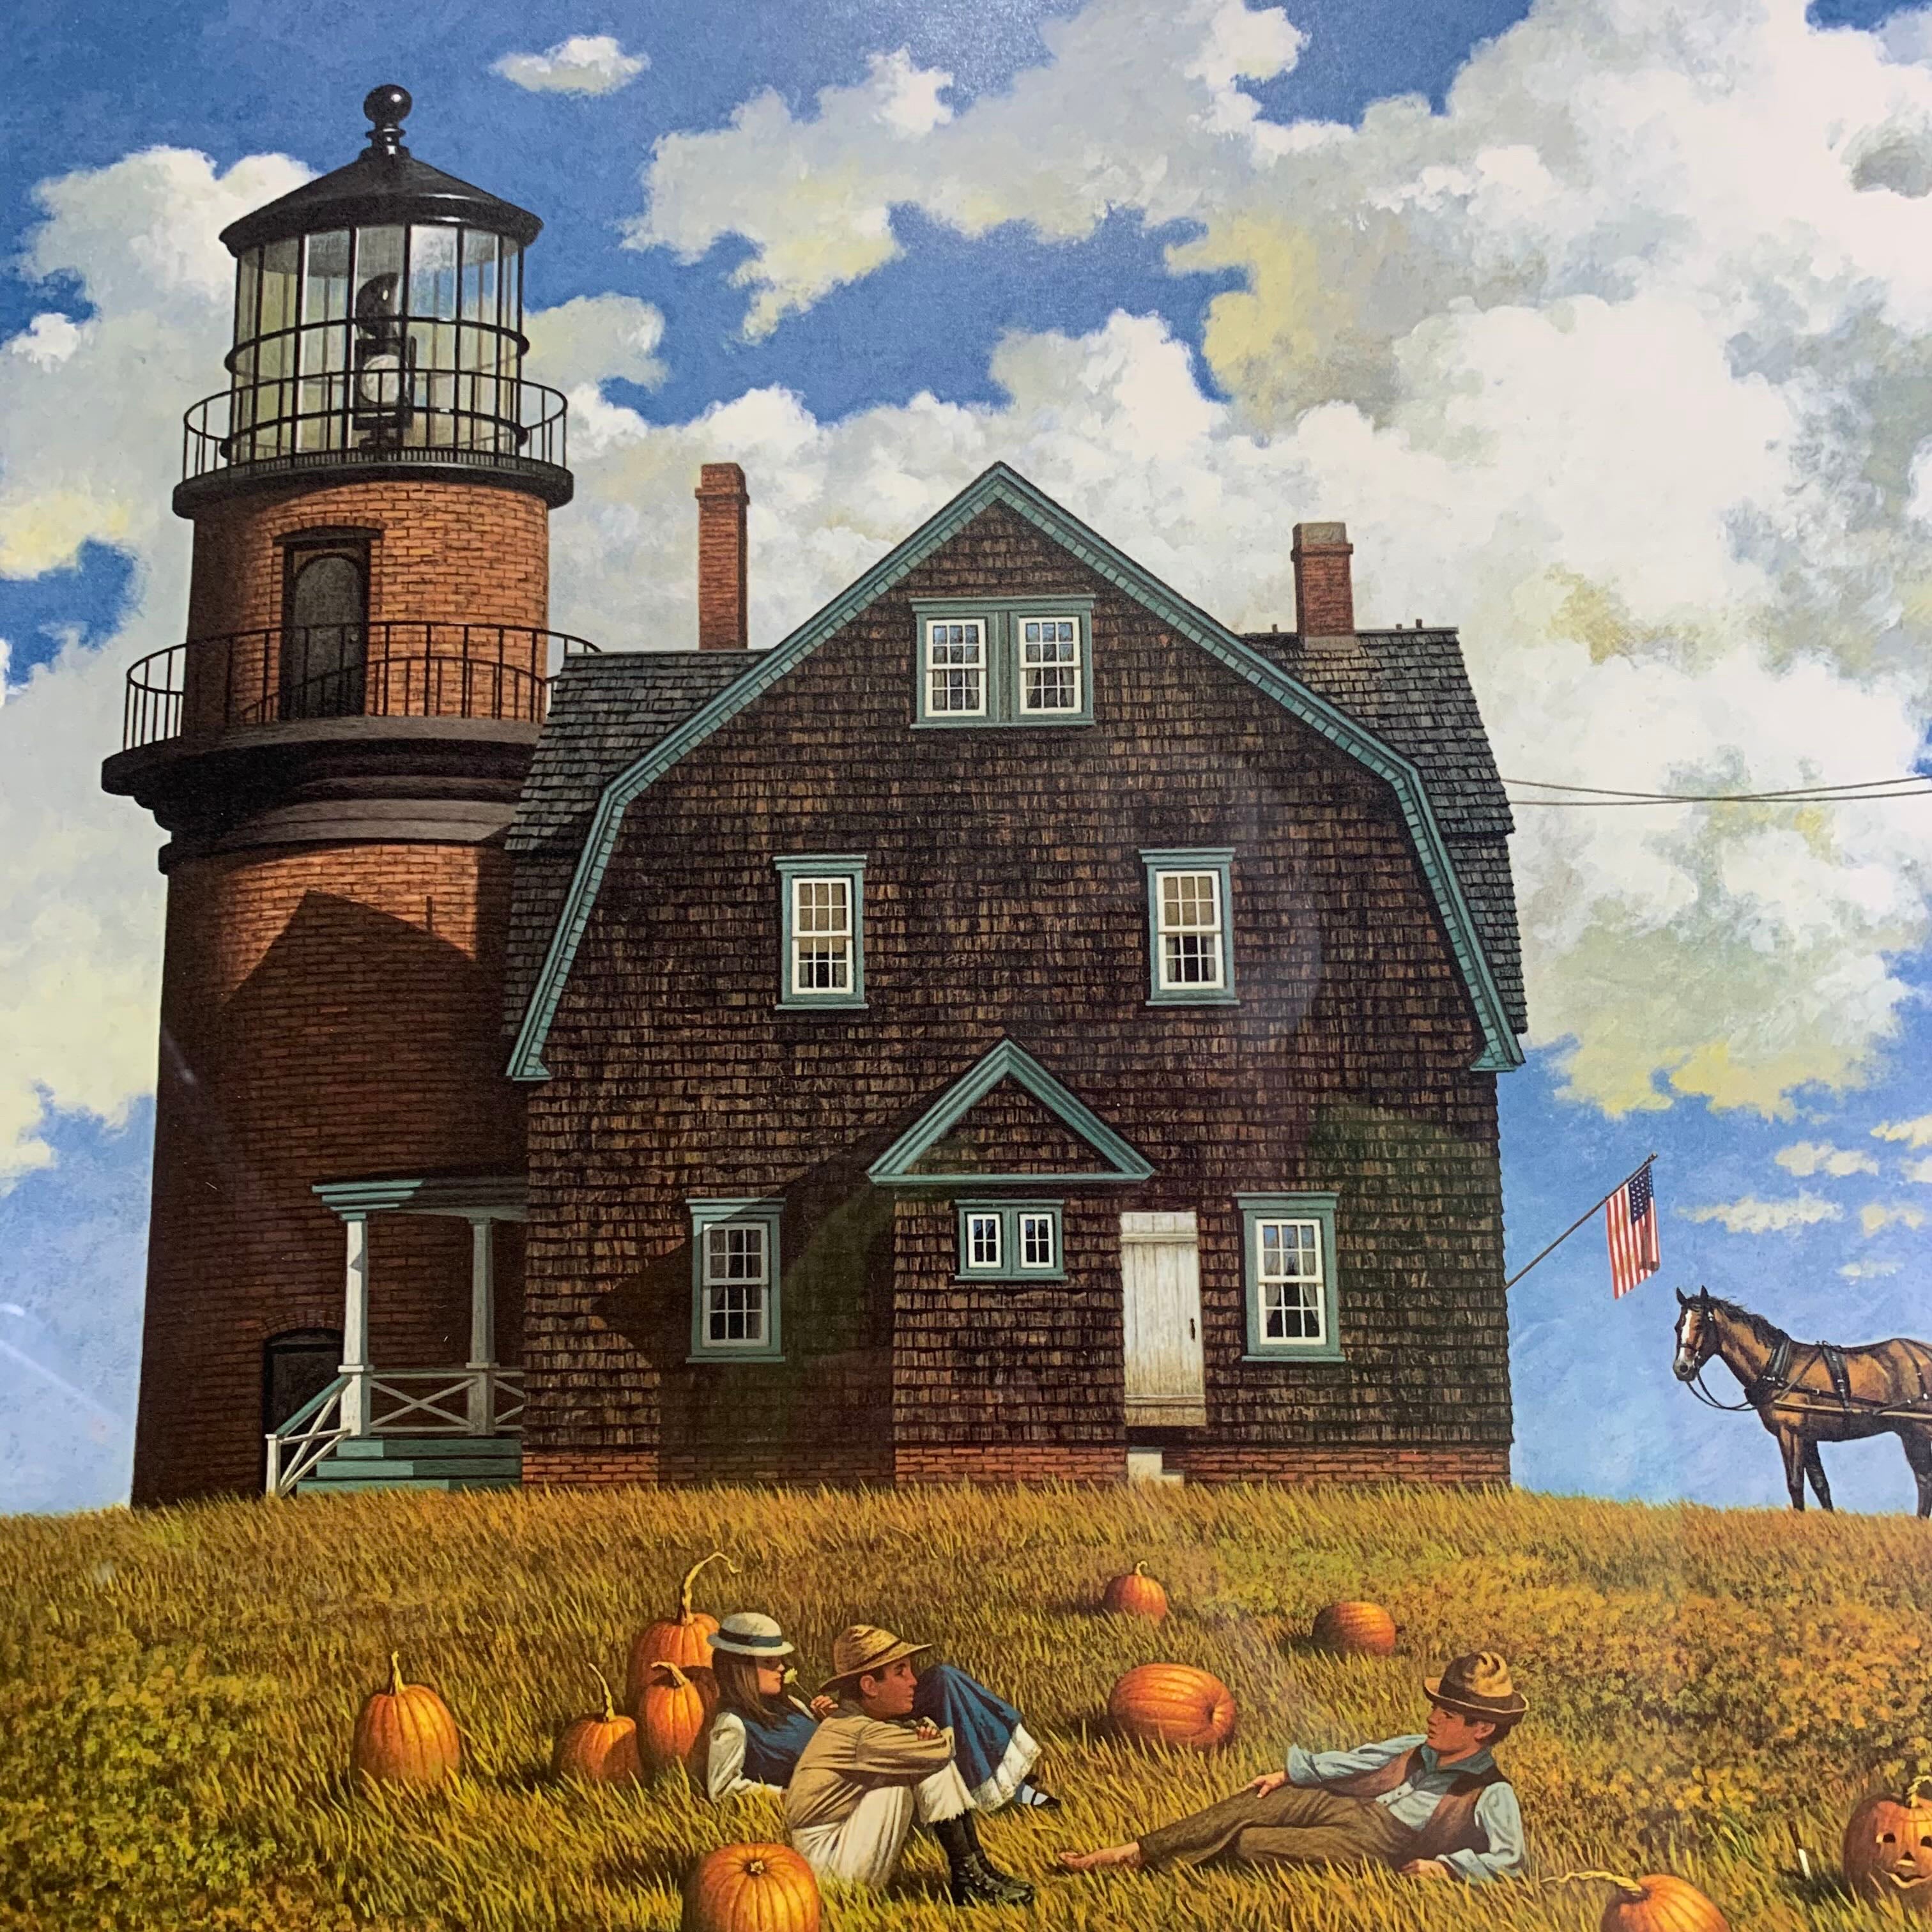 26"x 23" Gay Head Light by Charles Wysocki Framed and Signed Print 458/2500